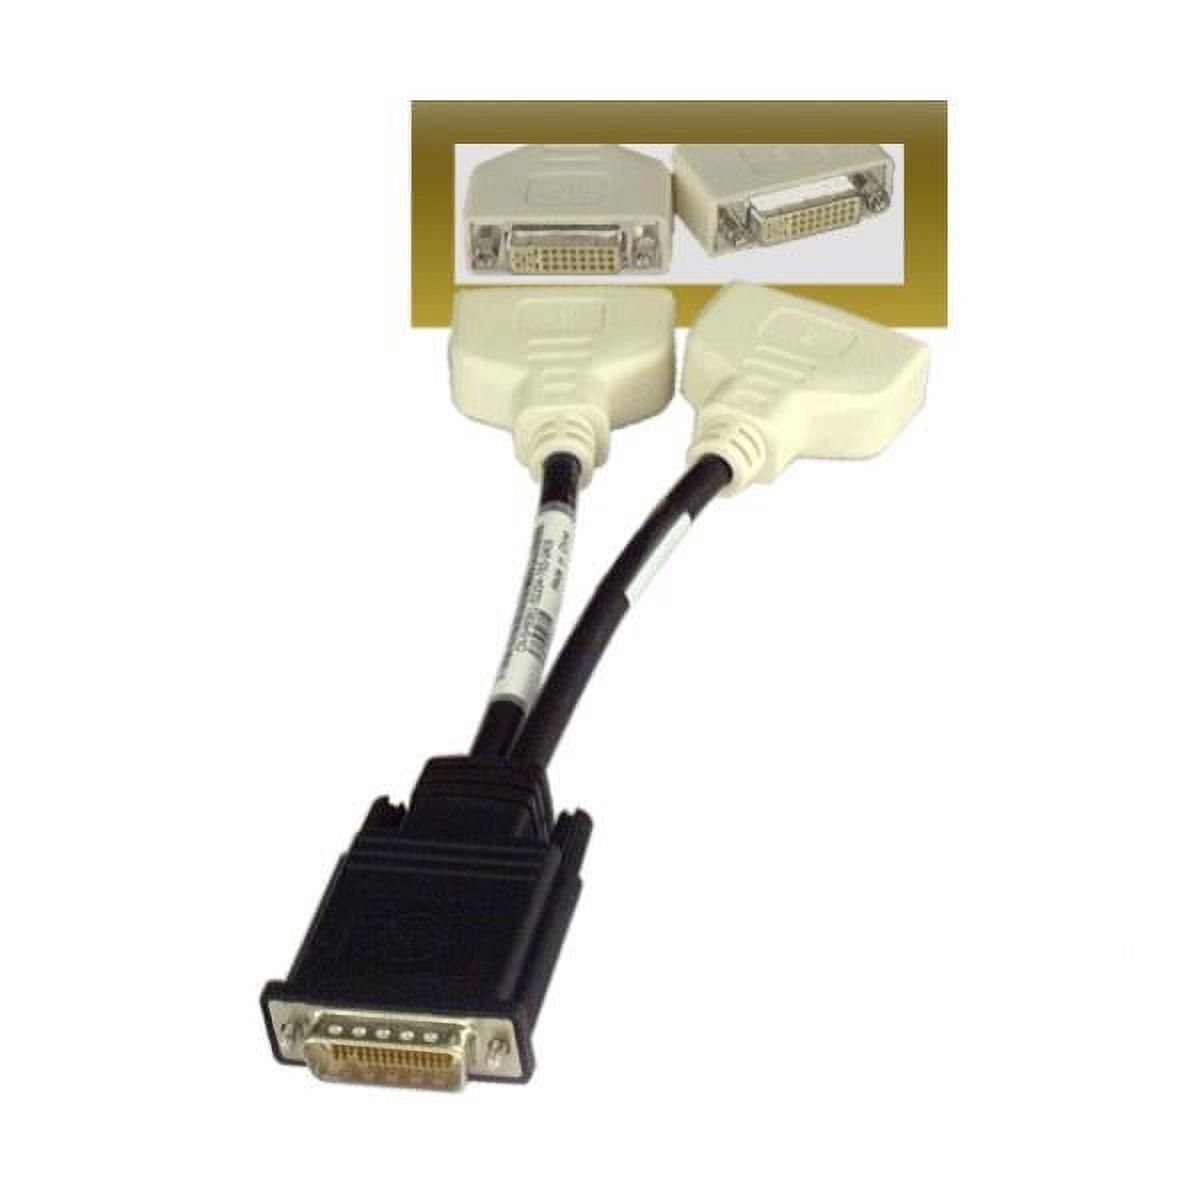 IEC M5150 DMS59 to DVI-I x 2 Y Adapter - image 1 of 1